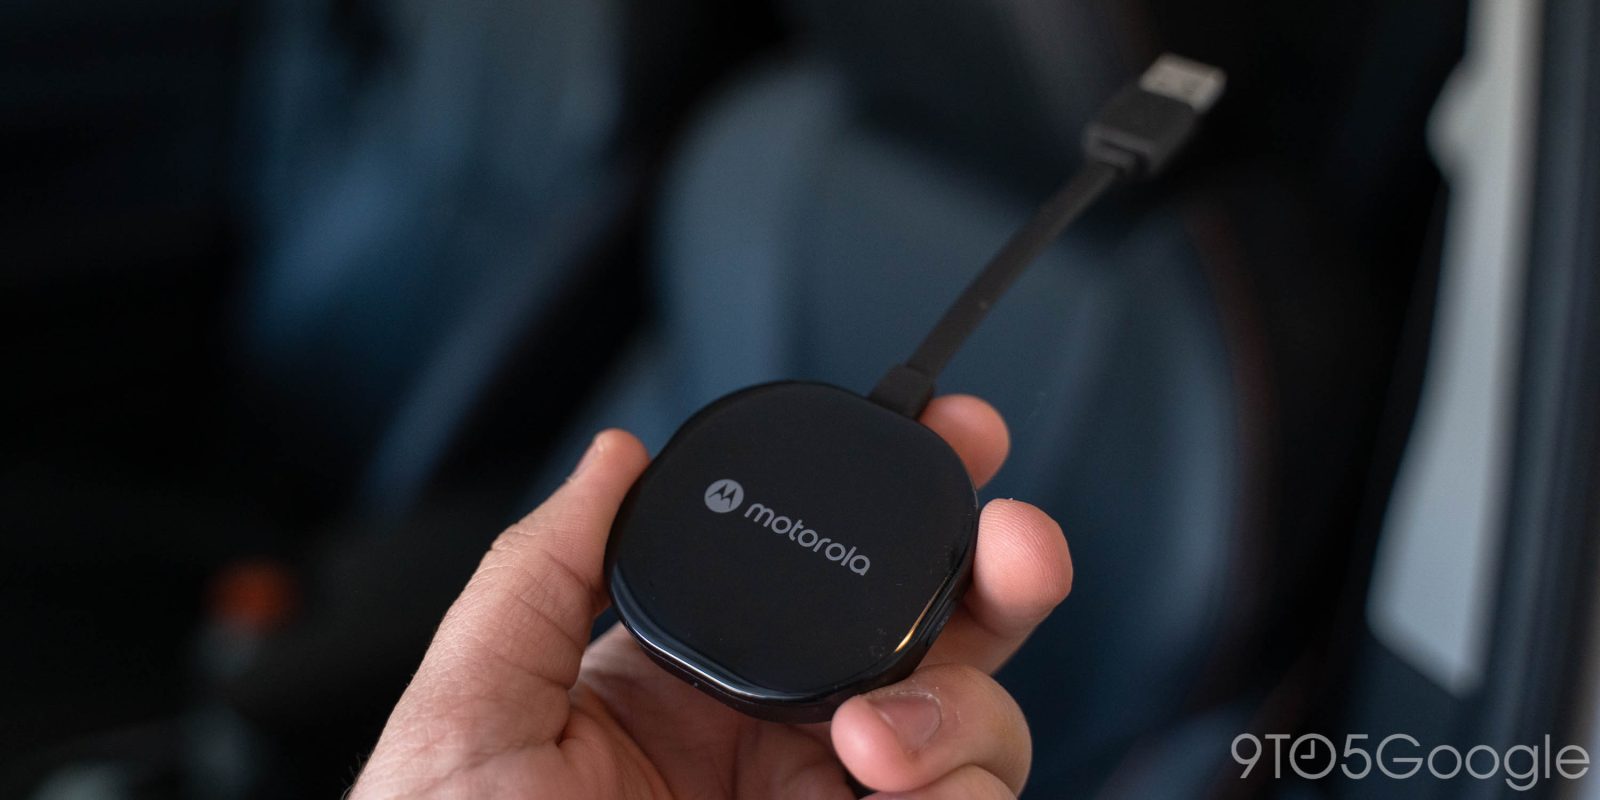 Motorola MA1 for wireless Android Auto: Easy, not best - 9to5Google